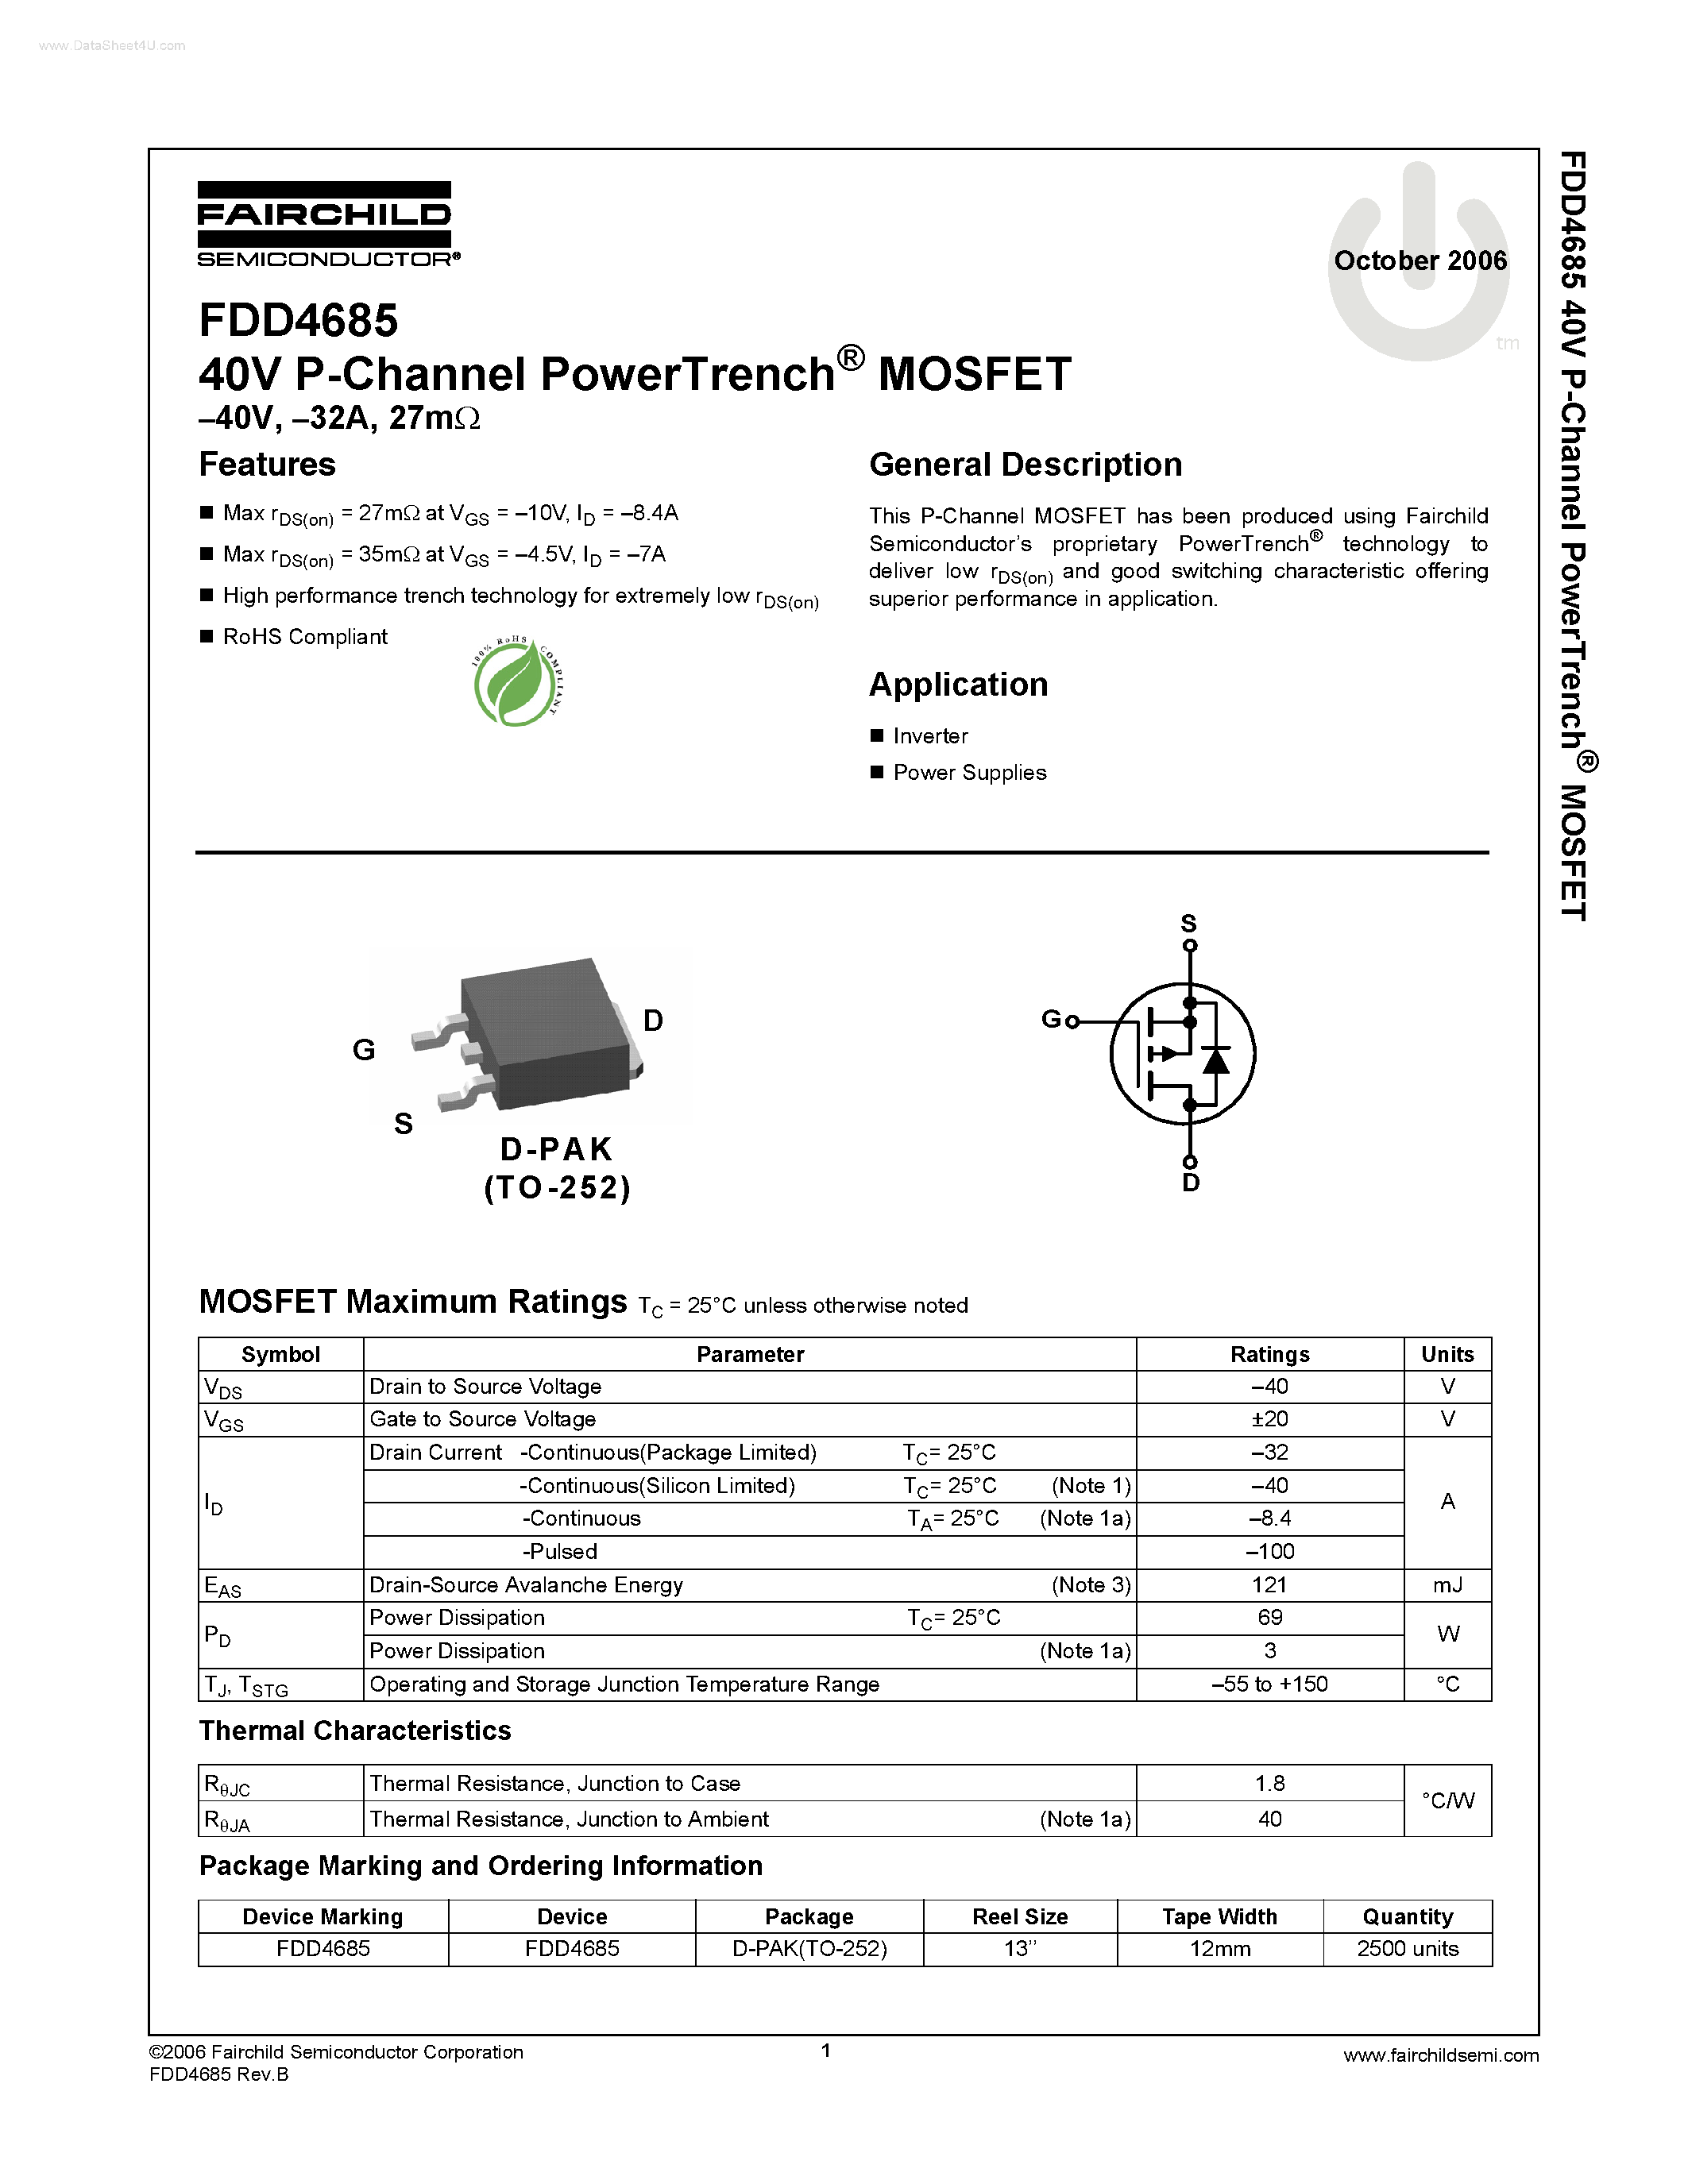 Даташит FDD4685 - P-Channel PowerTrench MOSFET страница 1